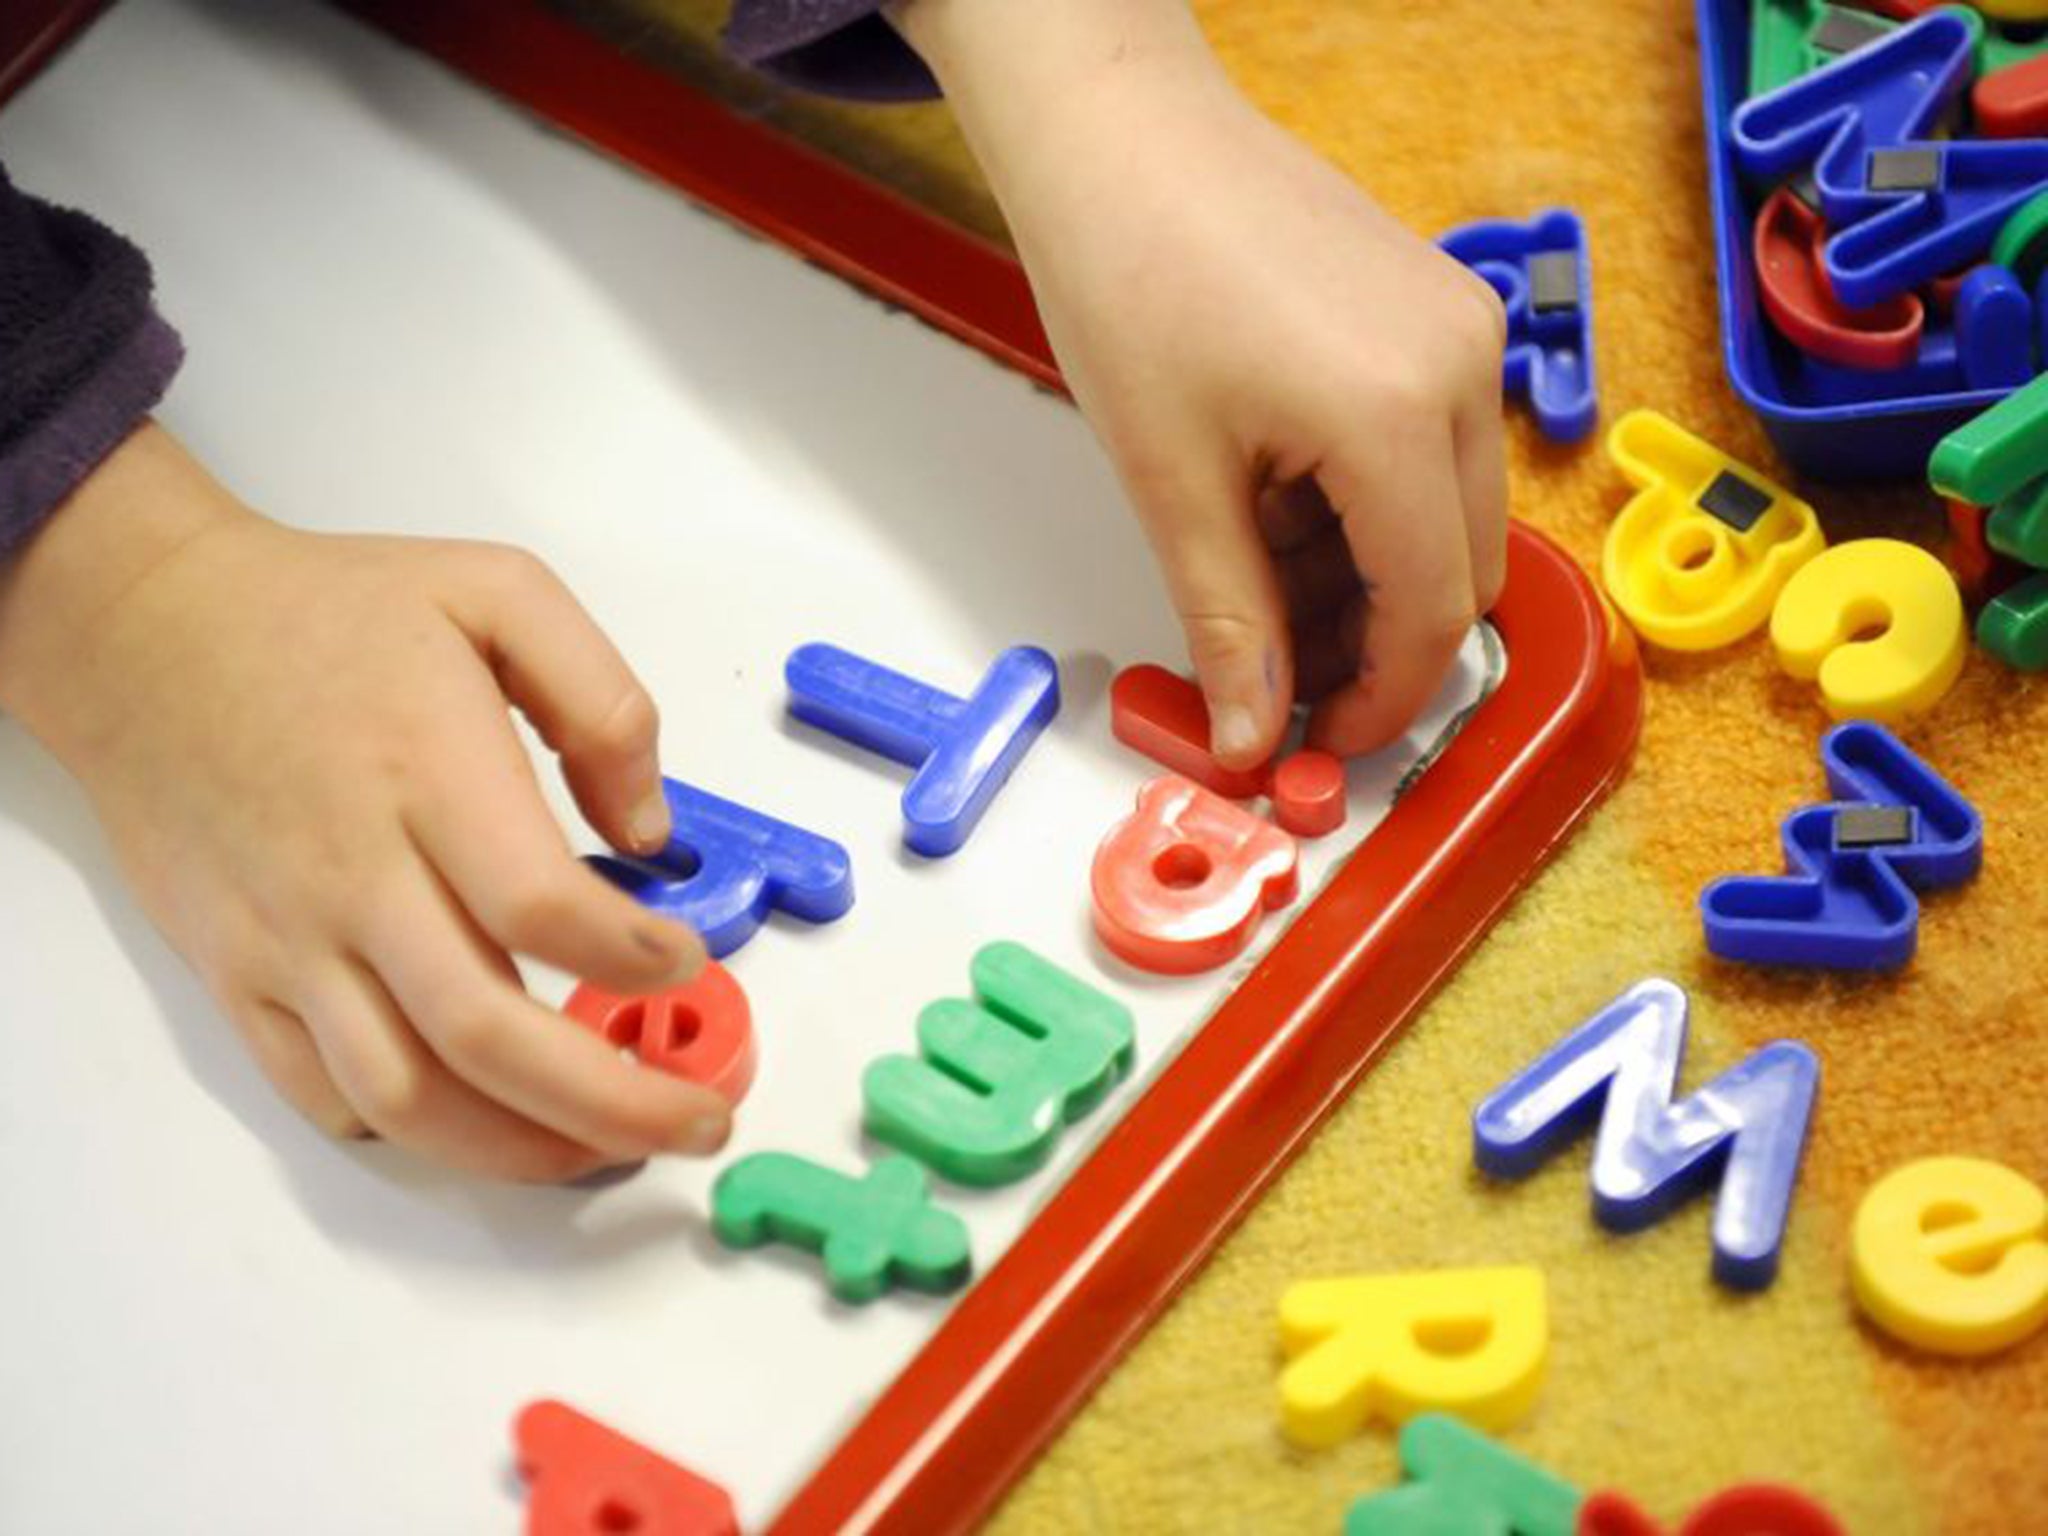 Barely two-in-five local authorities in England provide enough childcare services for parents who work full-time